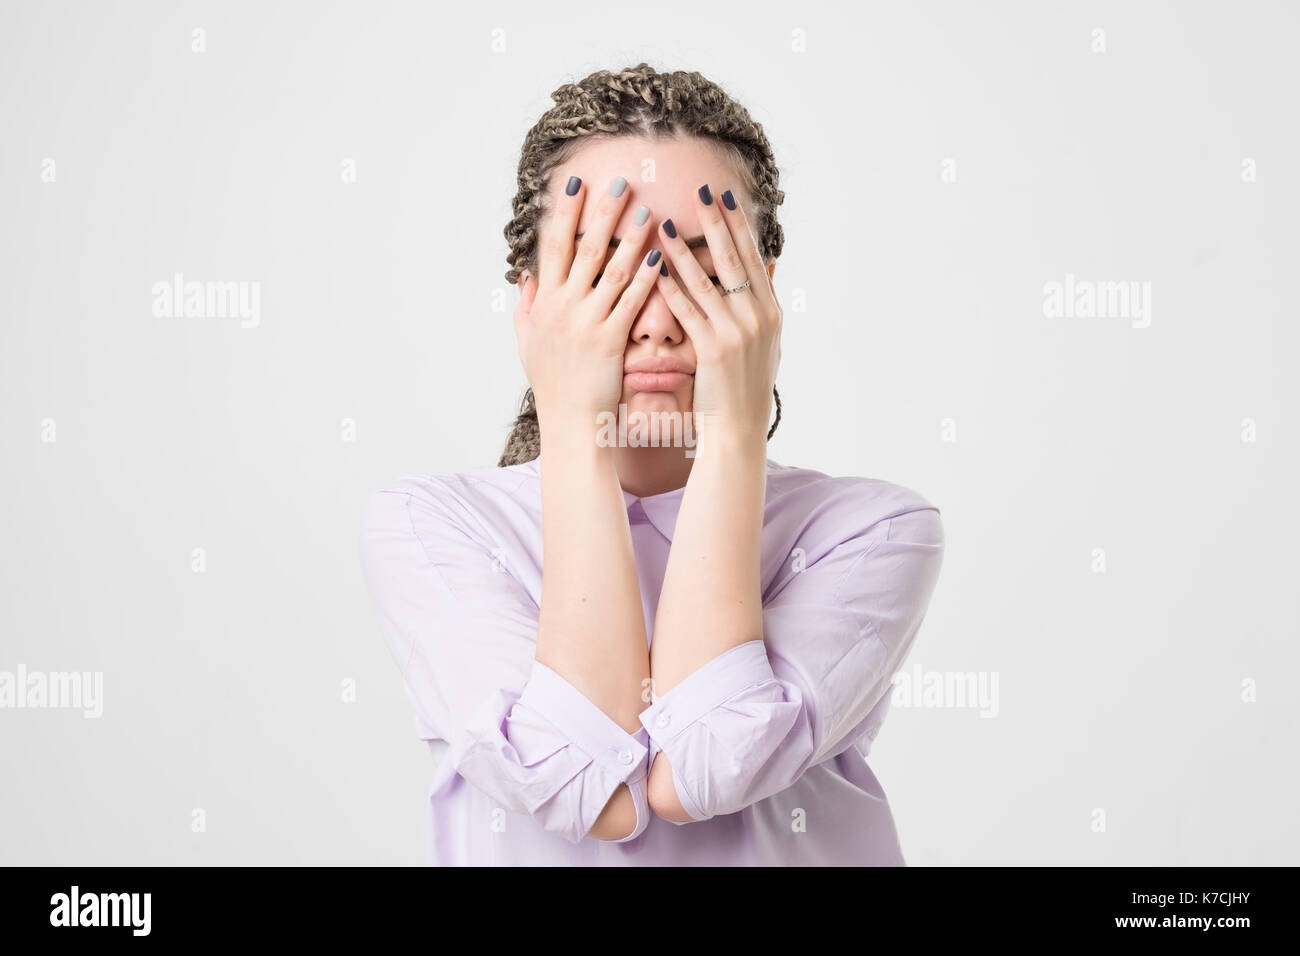 Caucasian woman covering her face with hand. Stock Photo